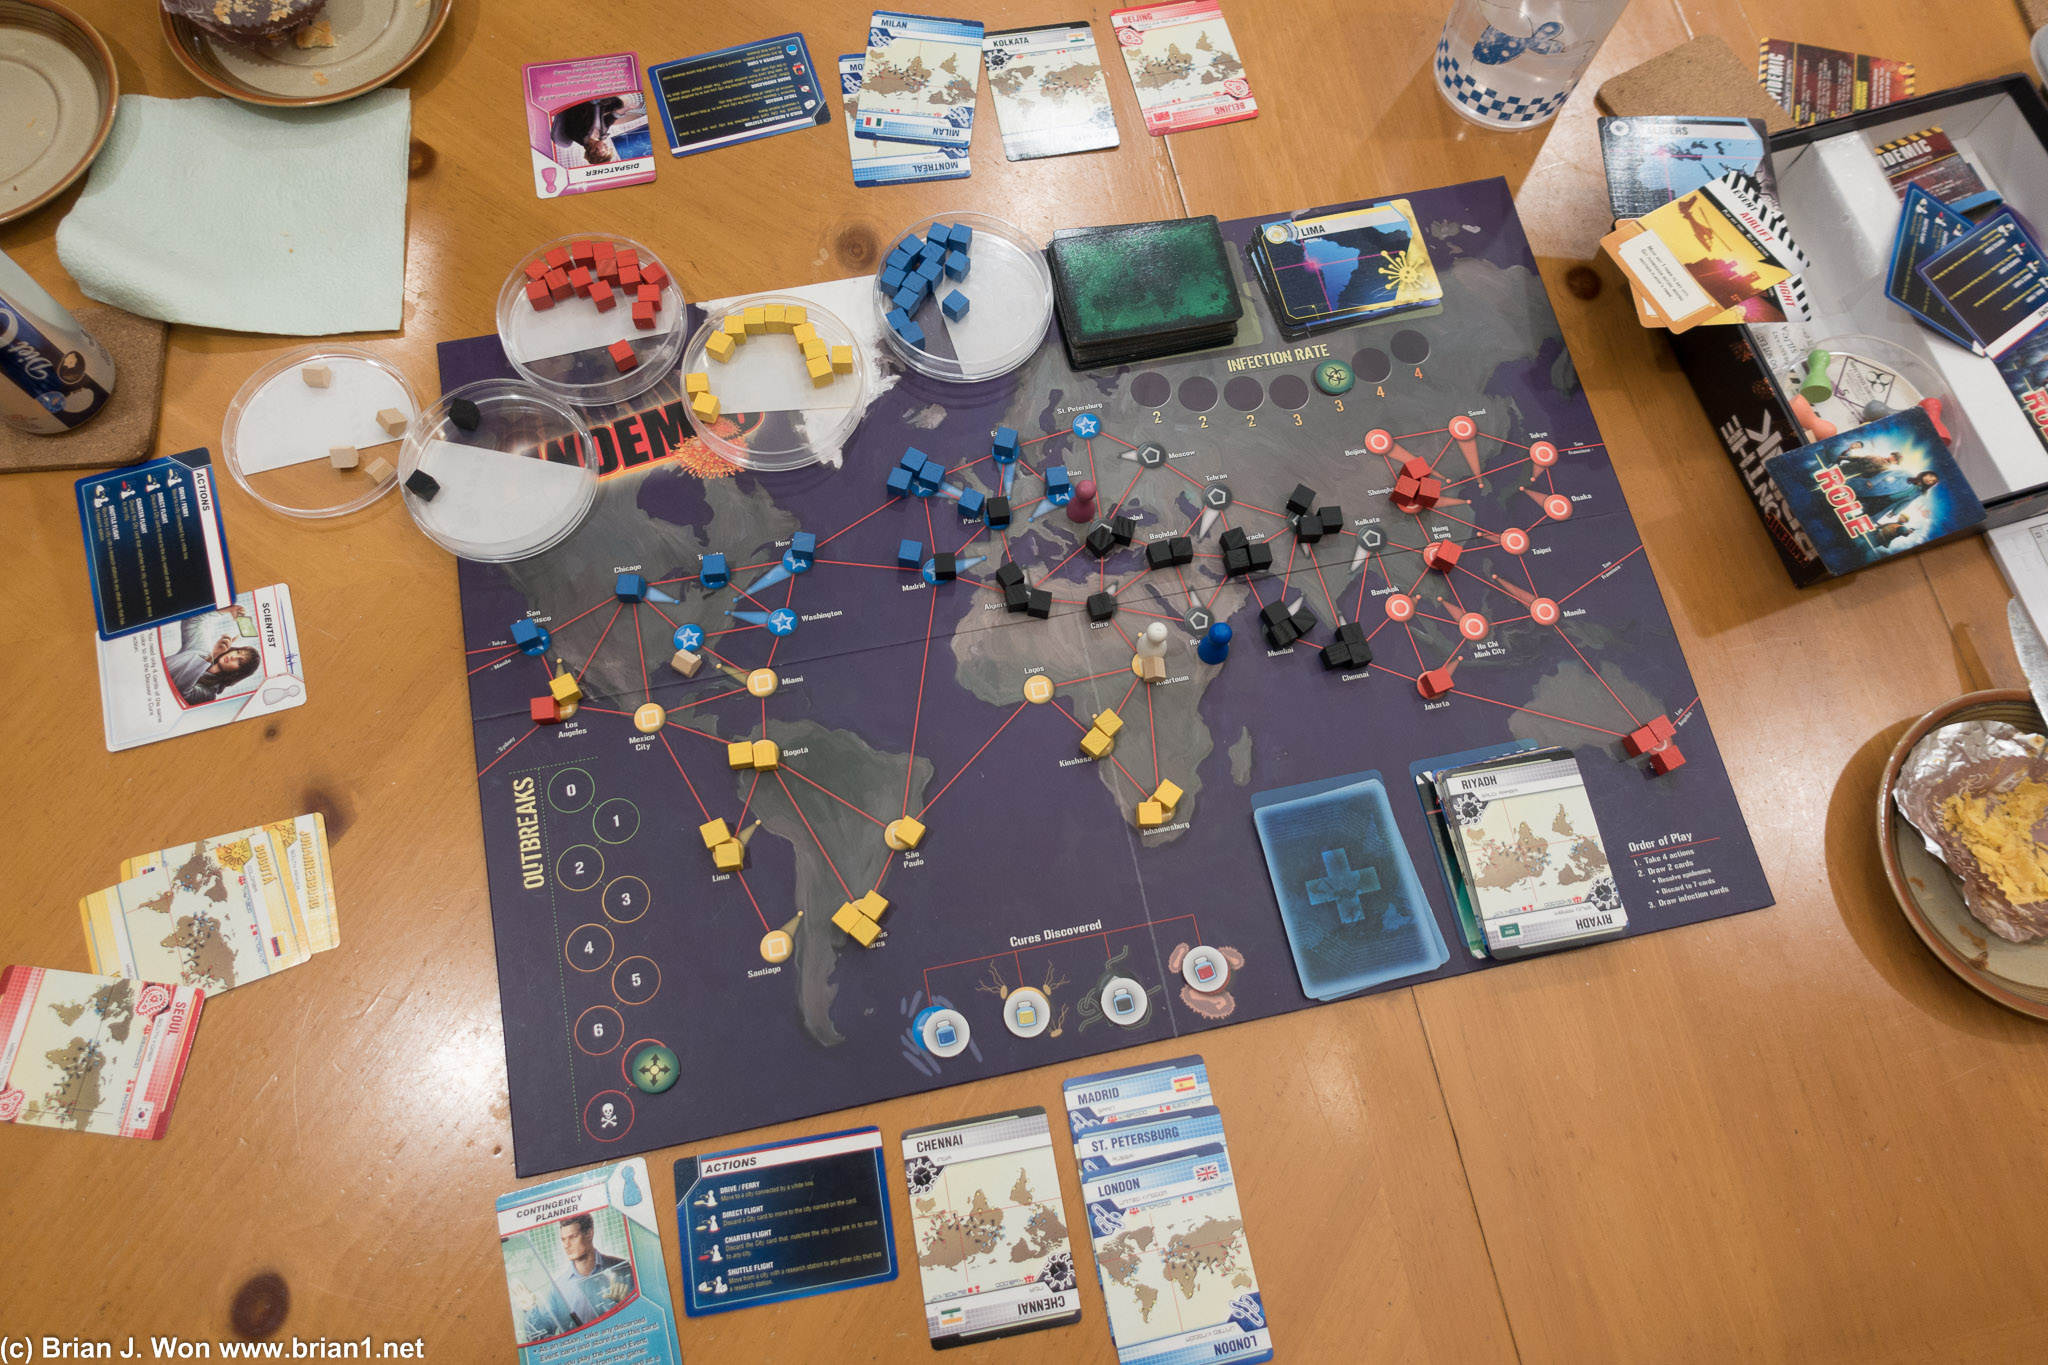 Only took 6 tries to win at Pandemic.